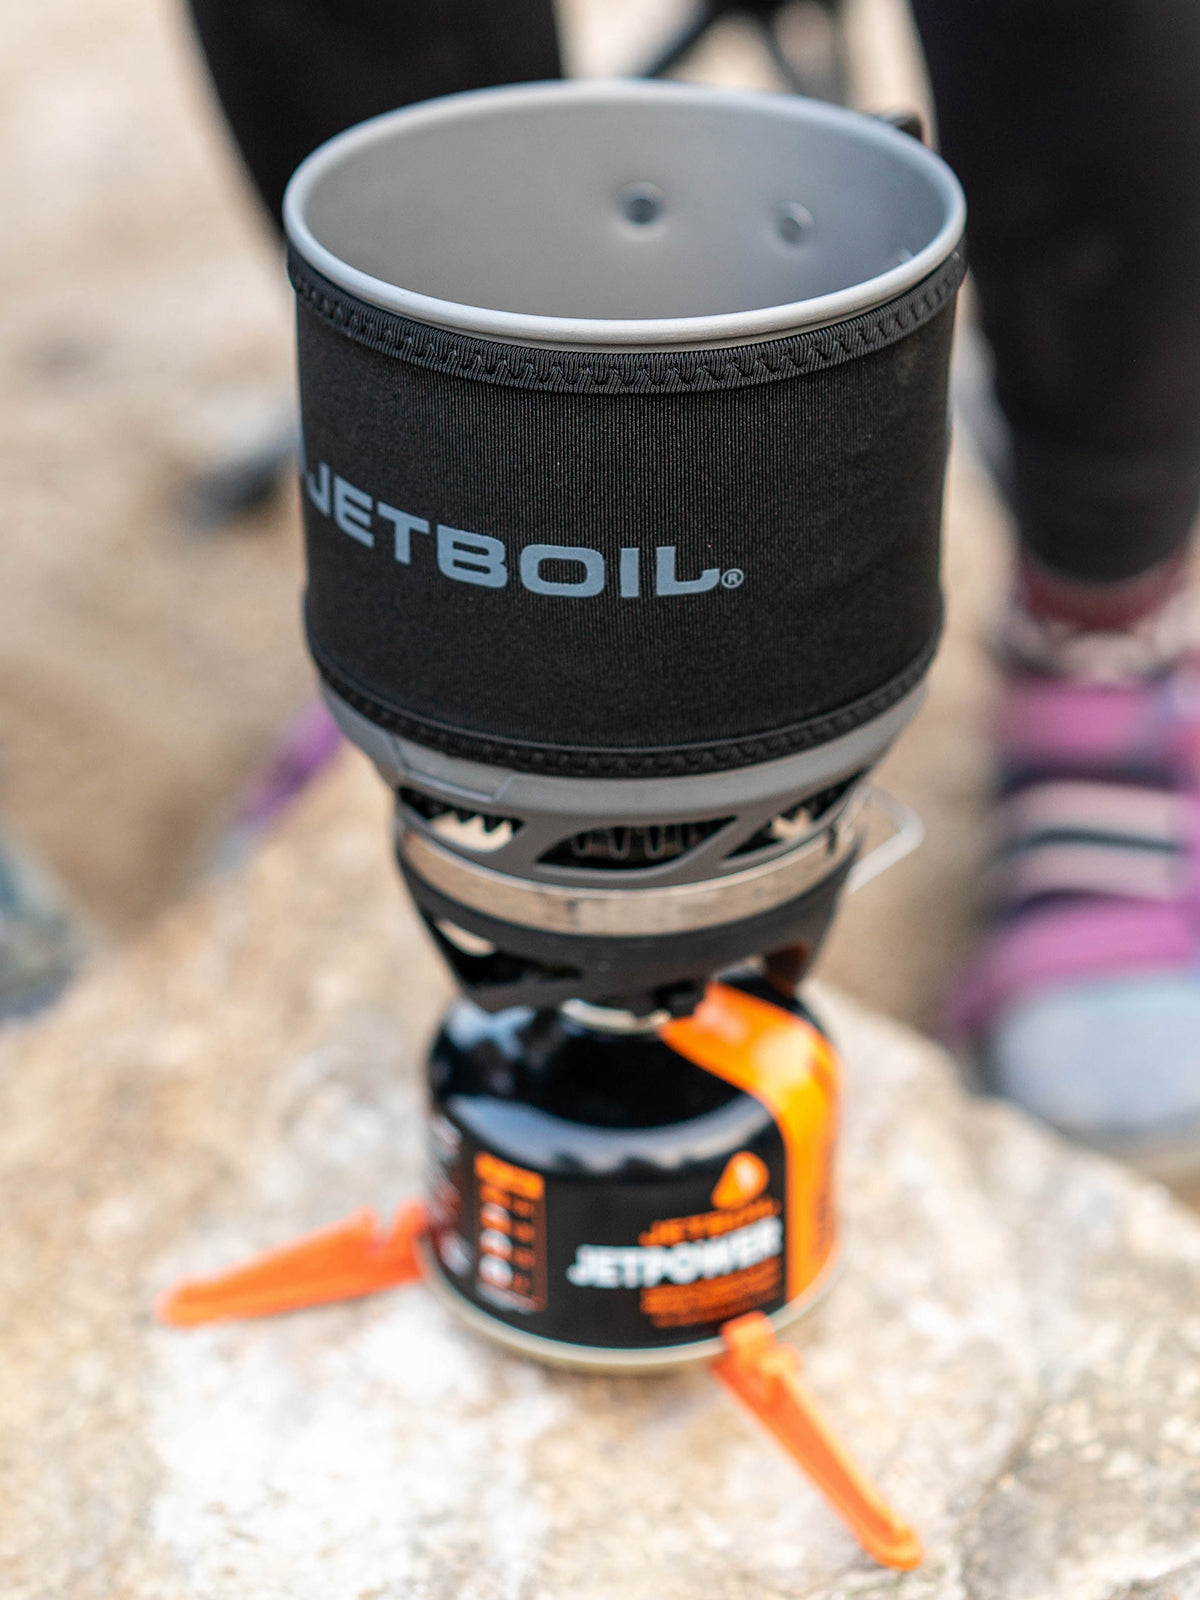 Jetboil MINIMO Cooking System set up ready to cook